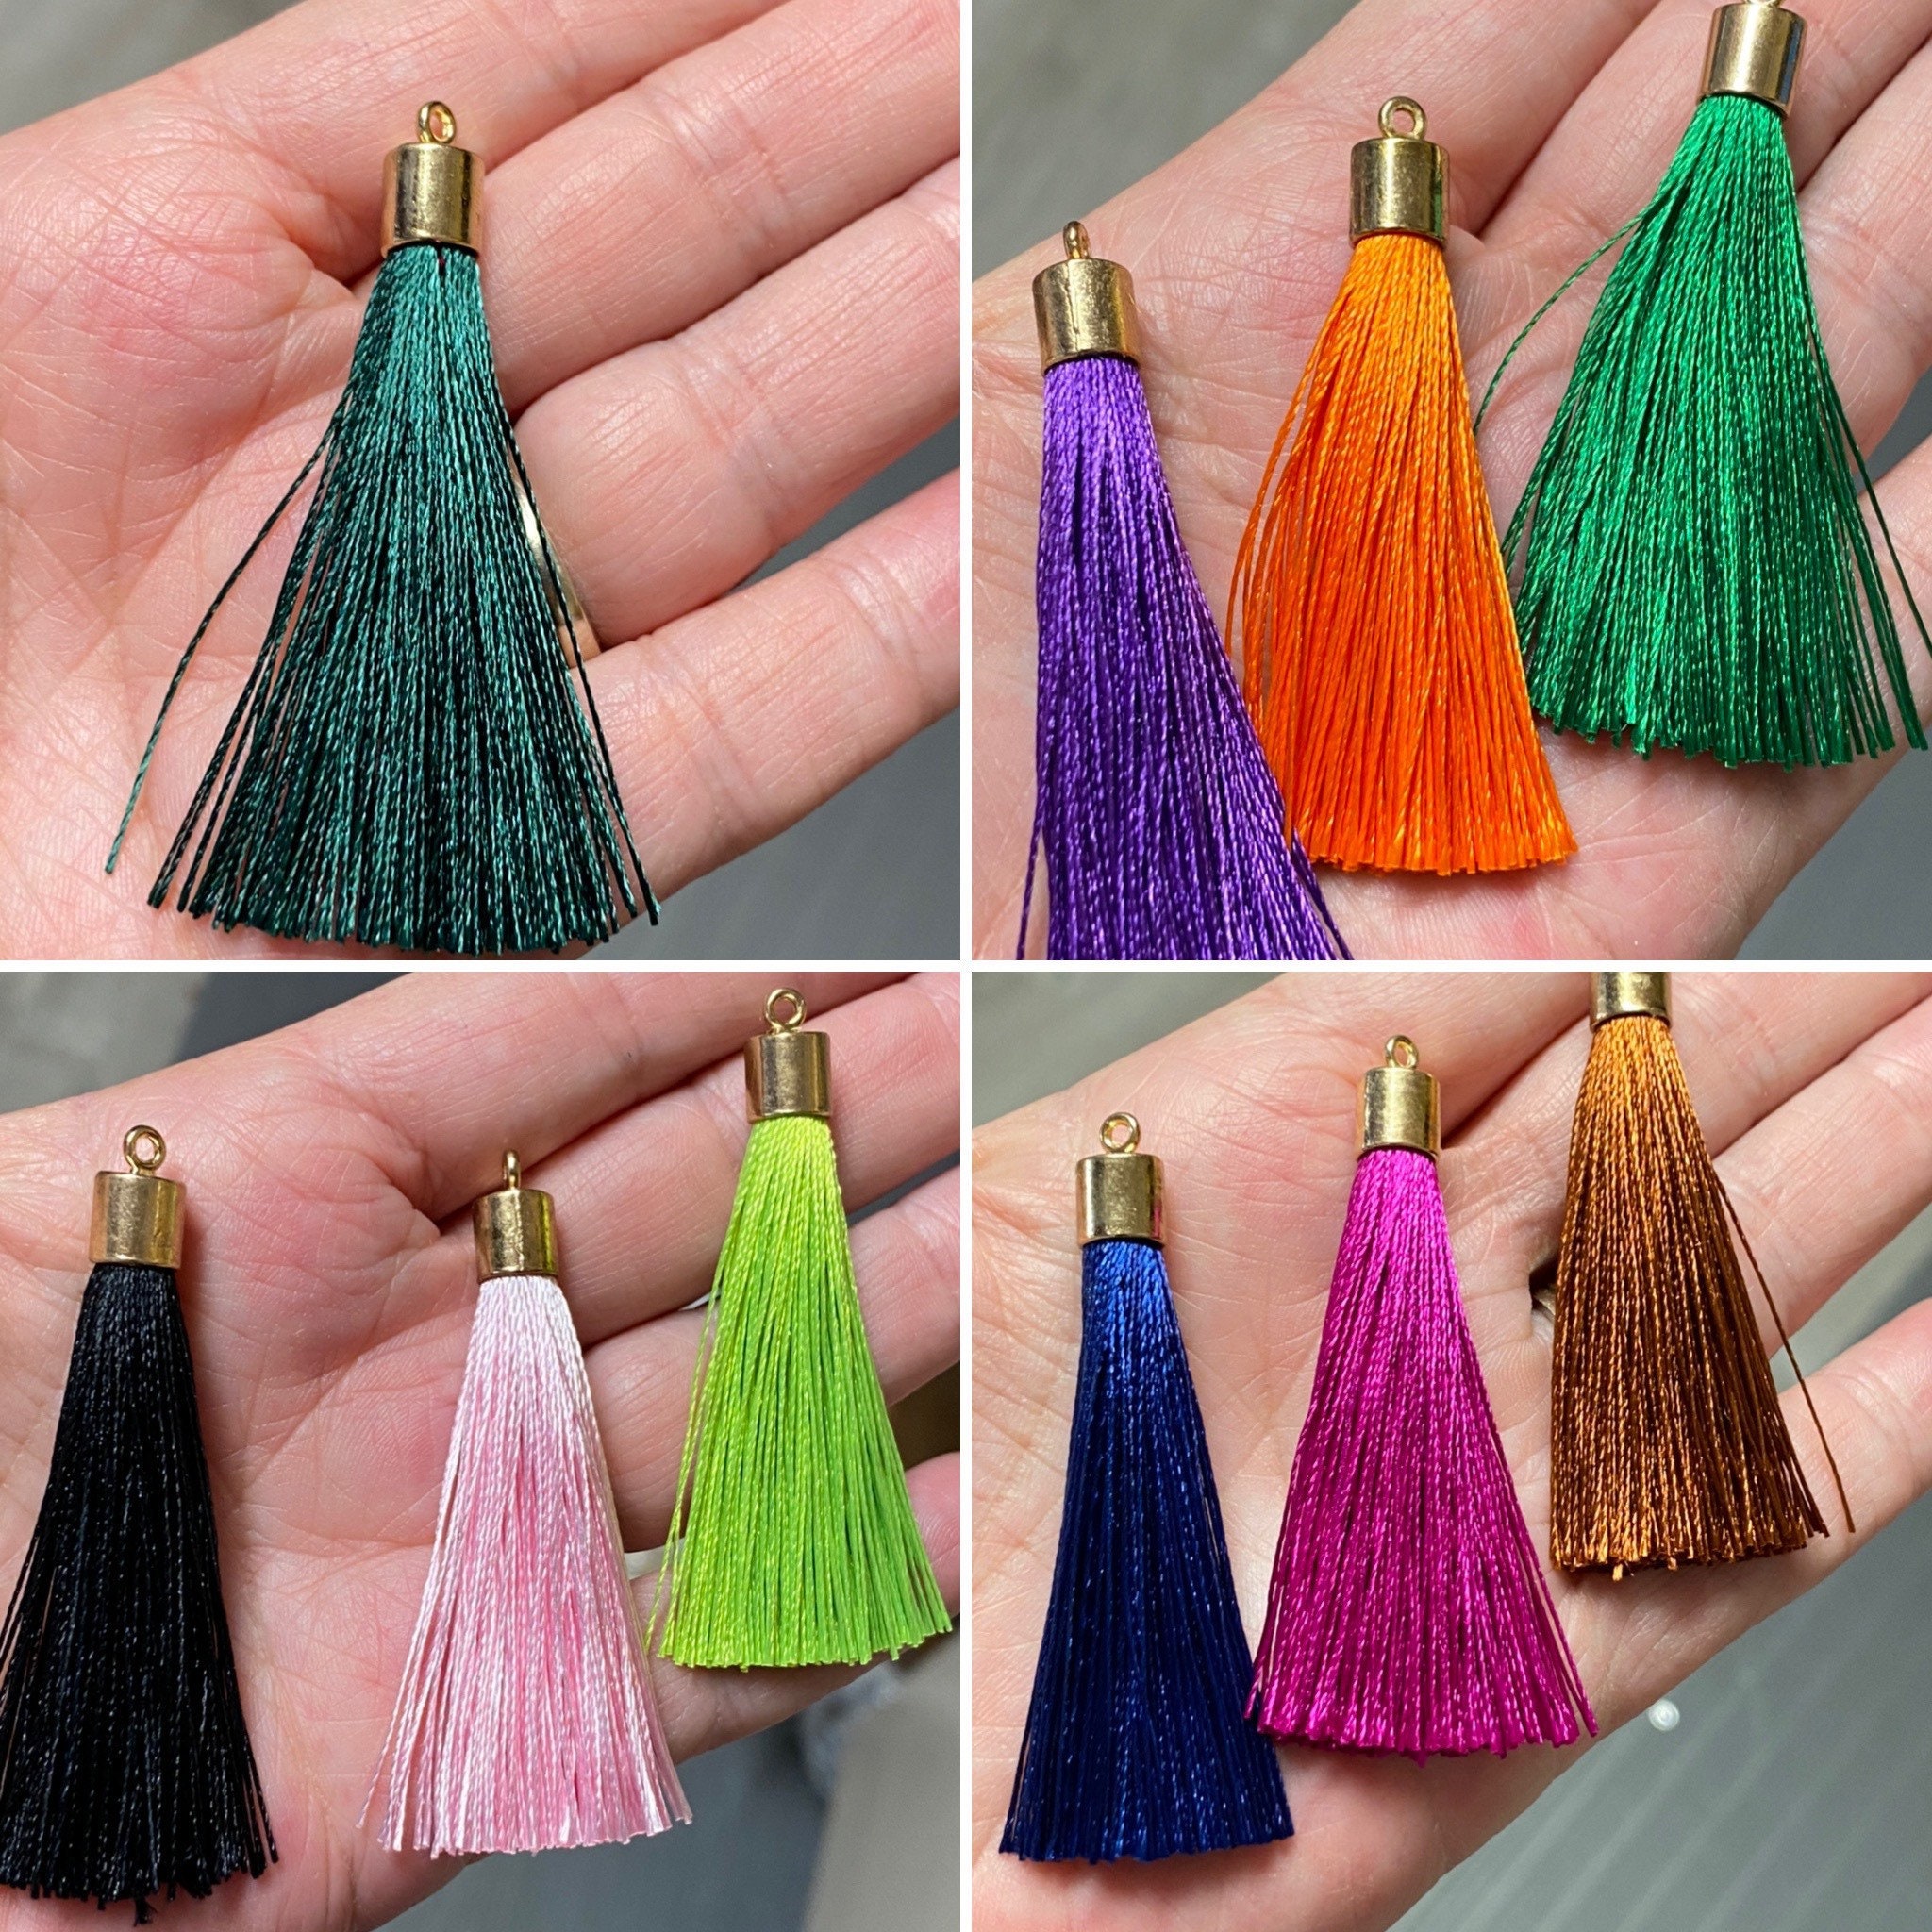 Silk Craft Tassels for Jewelry Making Different Color Decorative Key Chains  Tassel Trim Fringe With Gold Cap by the Pack, TSL-01 